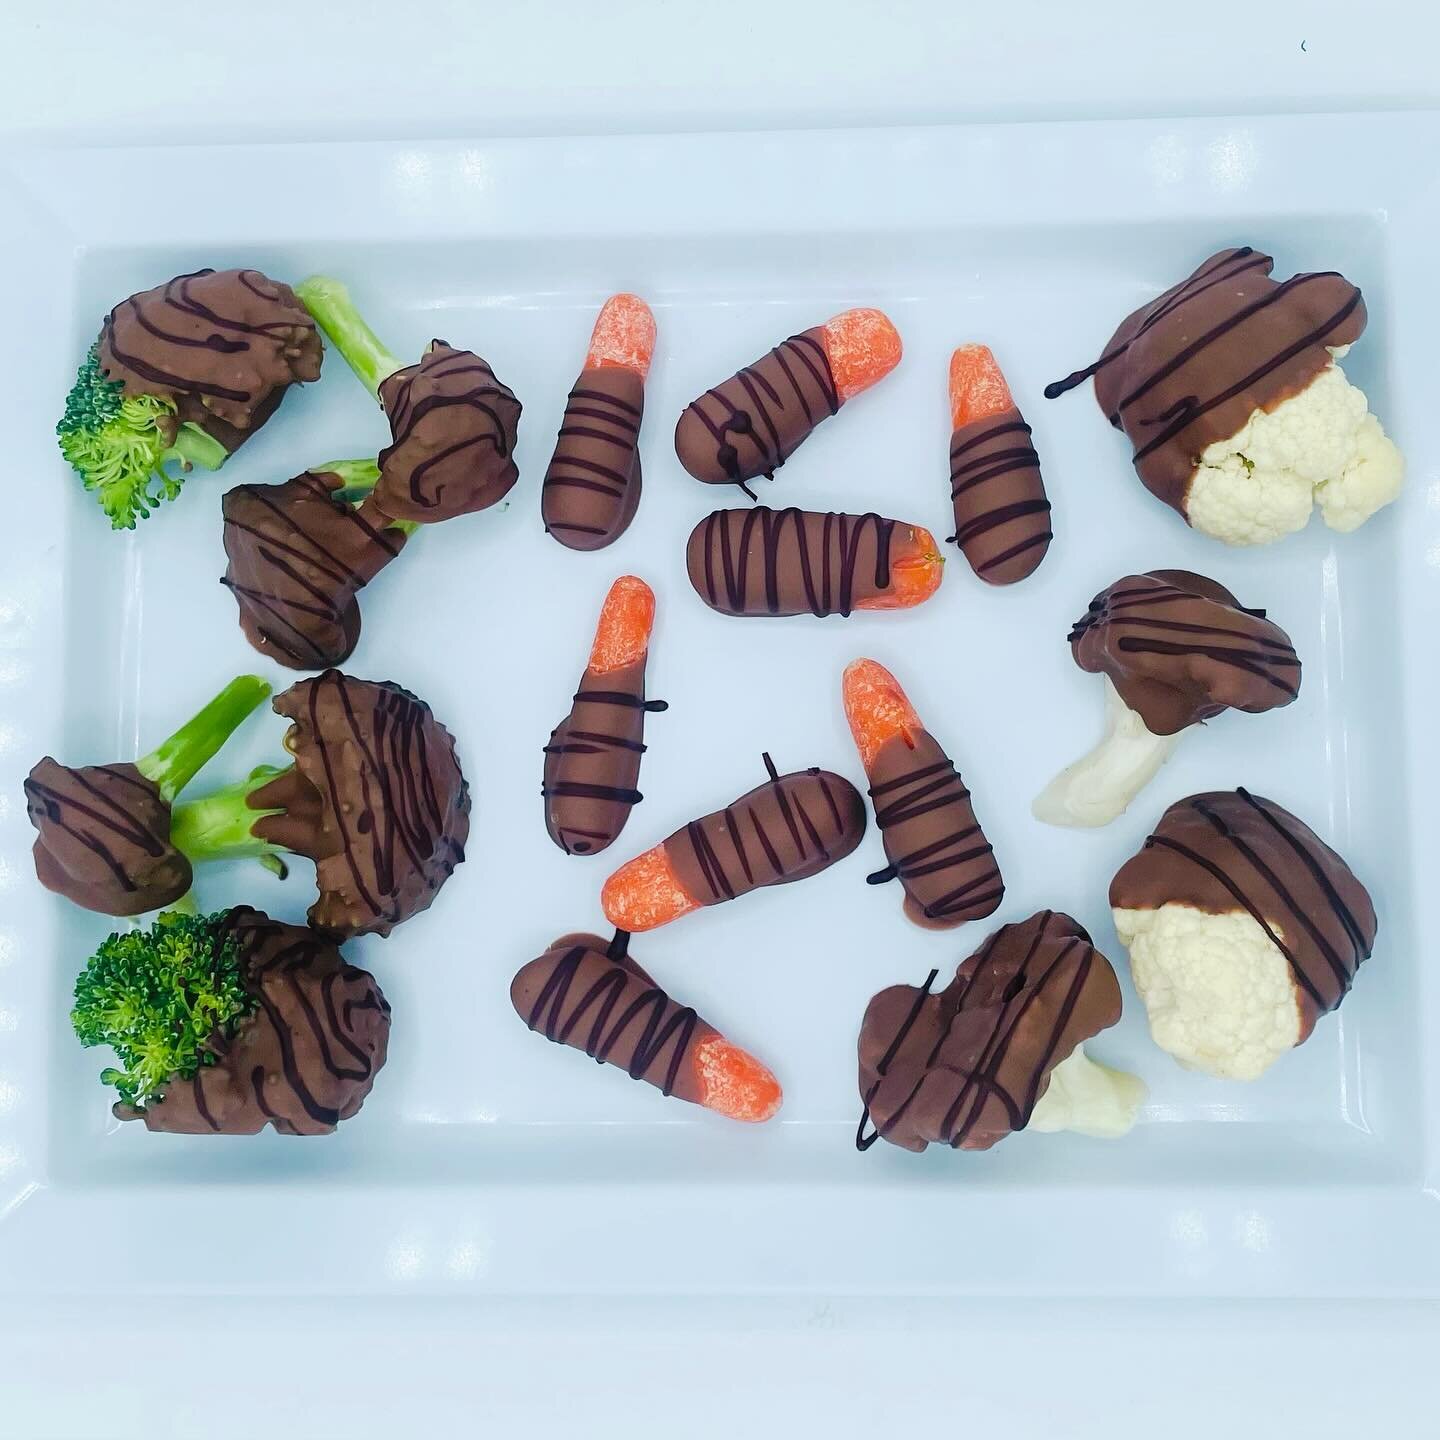 With it being the first of the month, now is the PERFECT time to get back into your health groove! Our chocolate covered veggies are sure to satisfy your sweet tooth, while keeping those health goals in check ✅🥦🥕🍫
.
.
#henryssweetretreat #itsoktoc